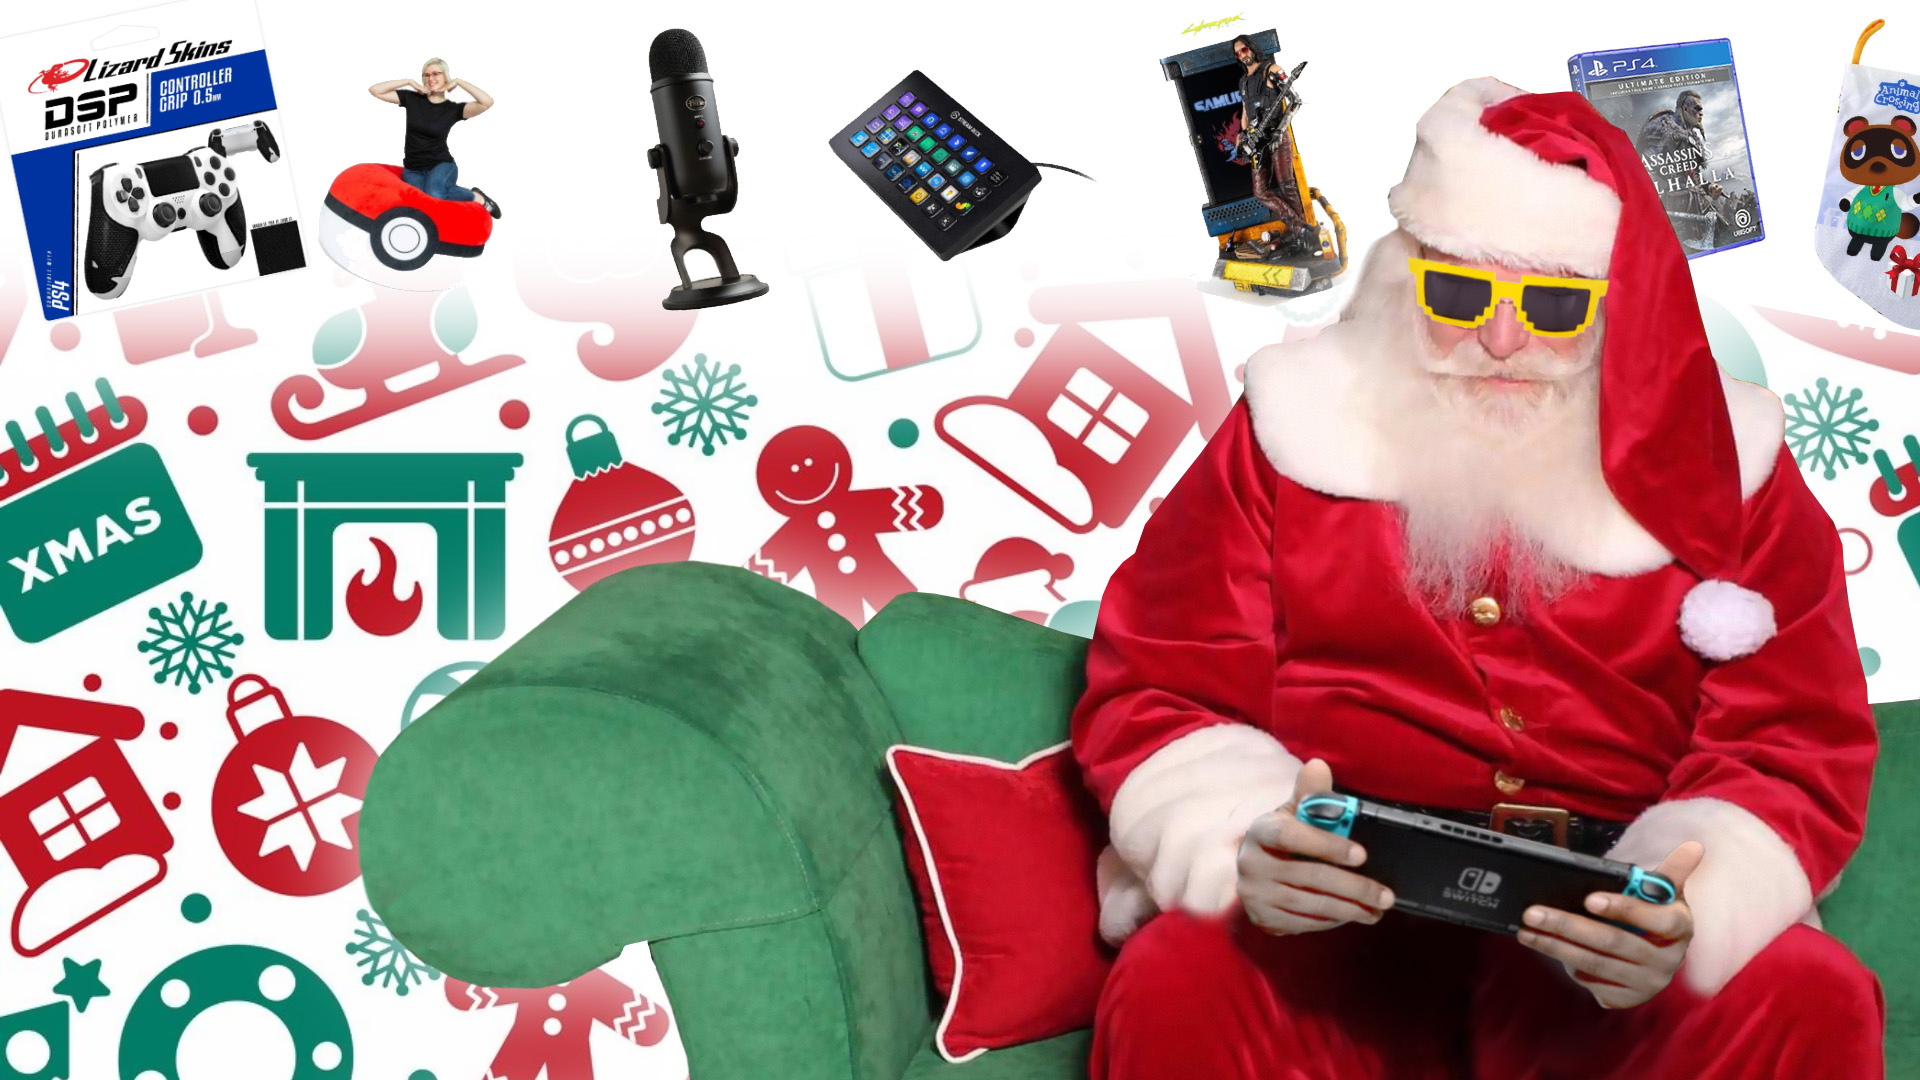 WellPlayed's Christmas Gaming Gift Guide